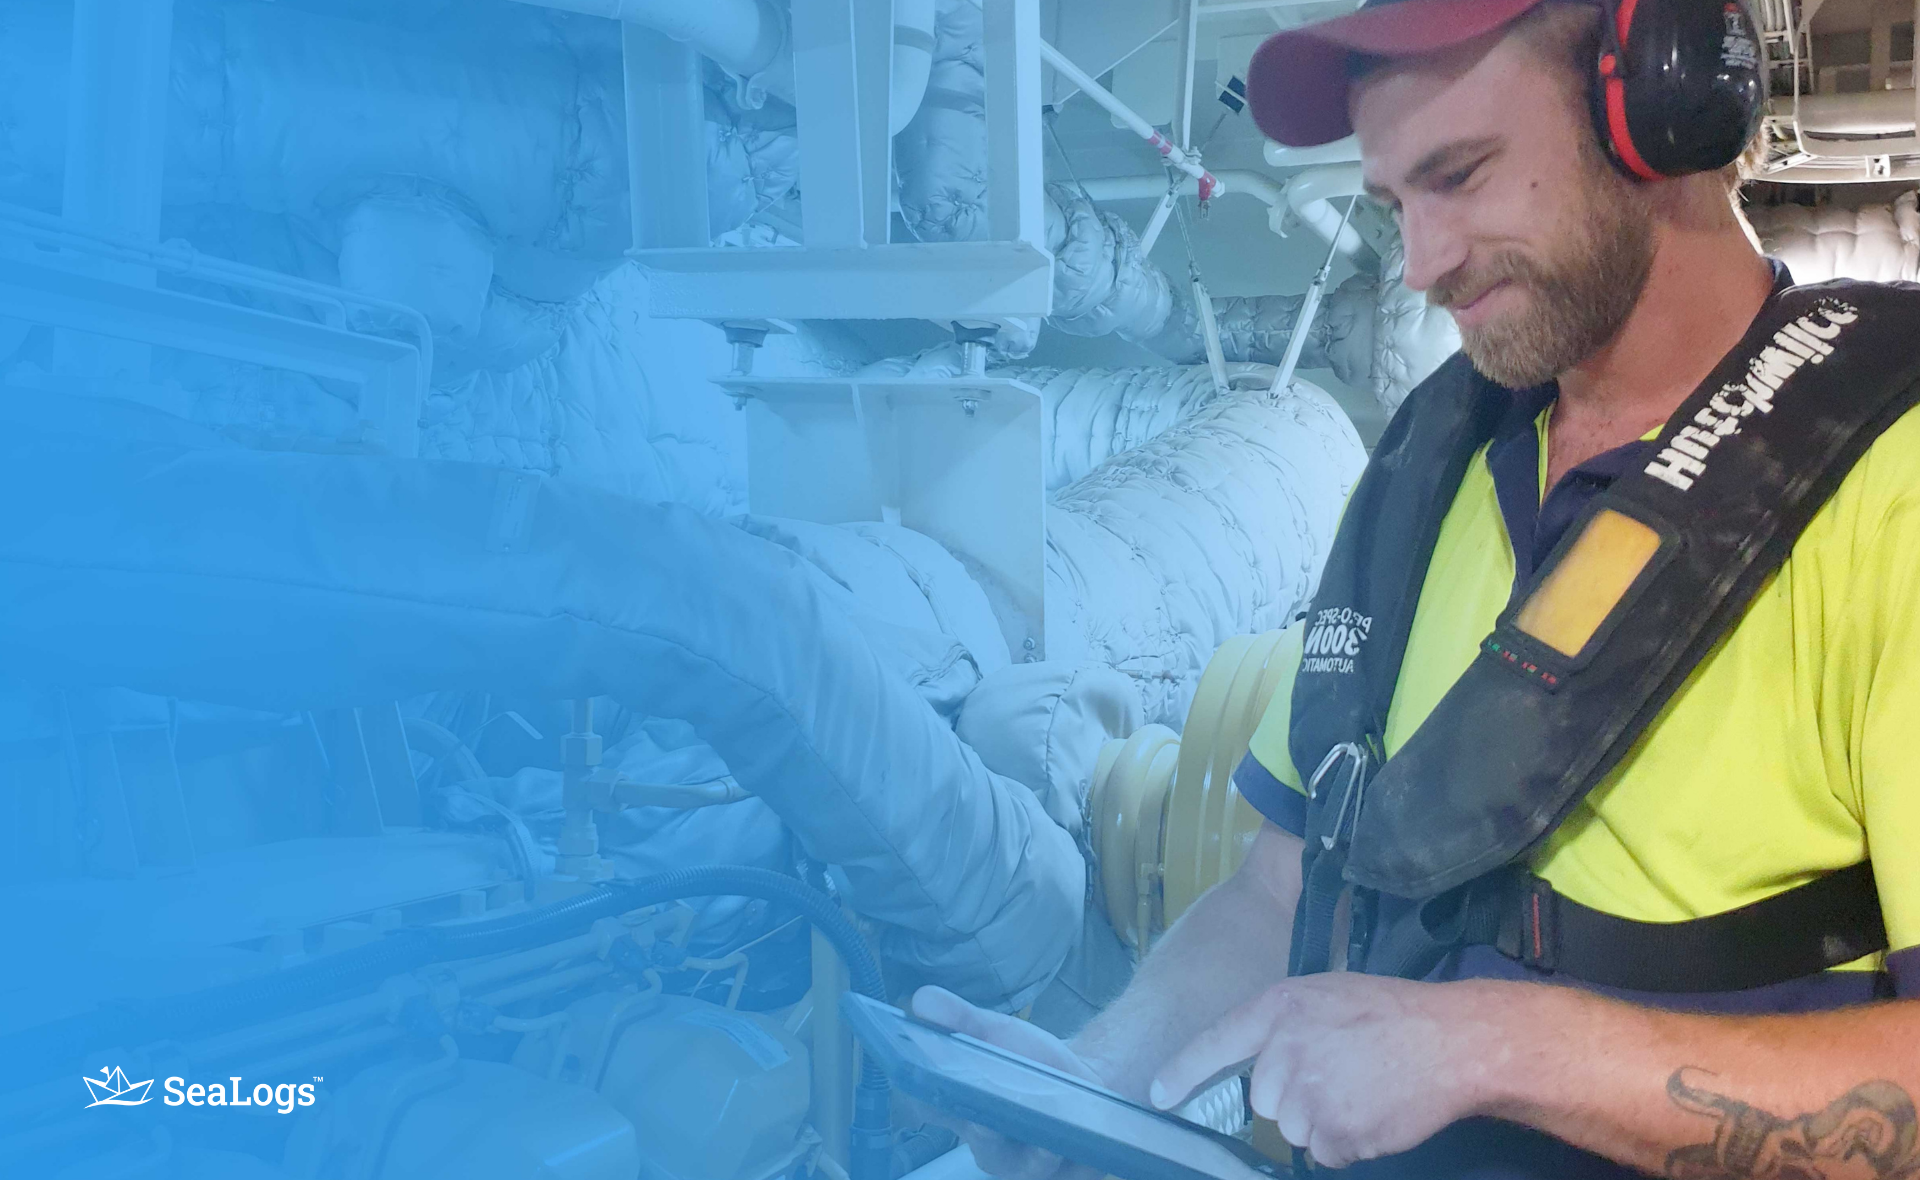 SeaLogs offers engineers an efficient platform for monitoring vessel systems, scheduling maintenance, and ensuring technical compliance, leading to optimized vessel performance and reliability.